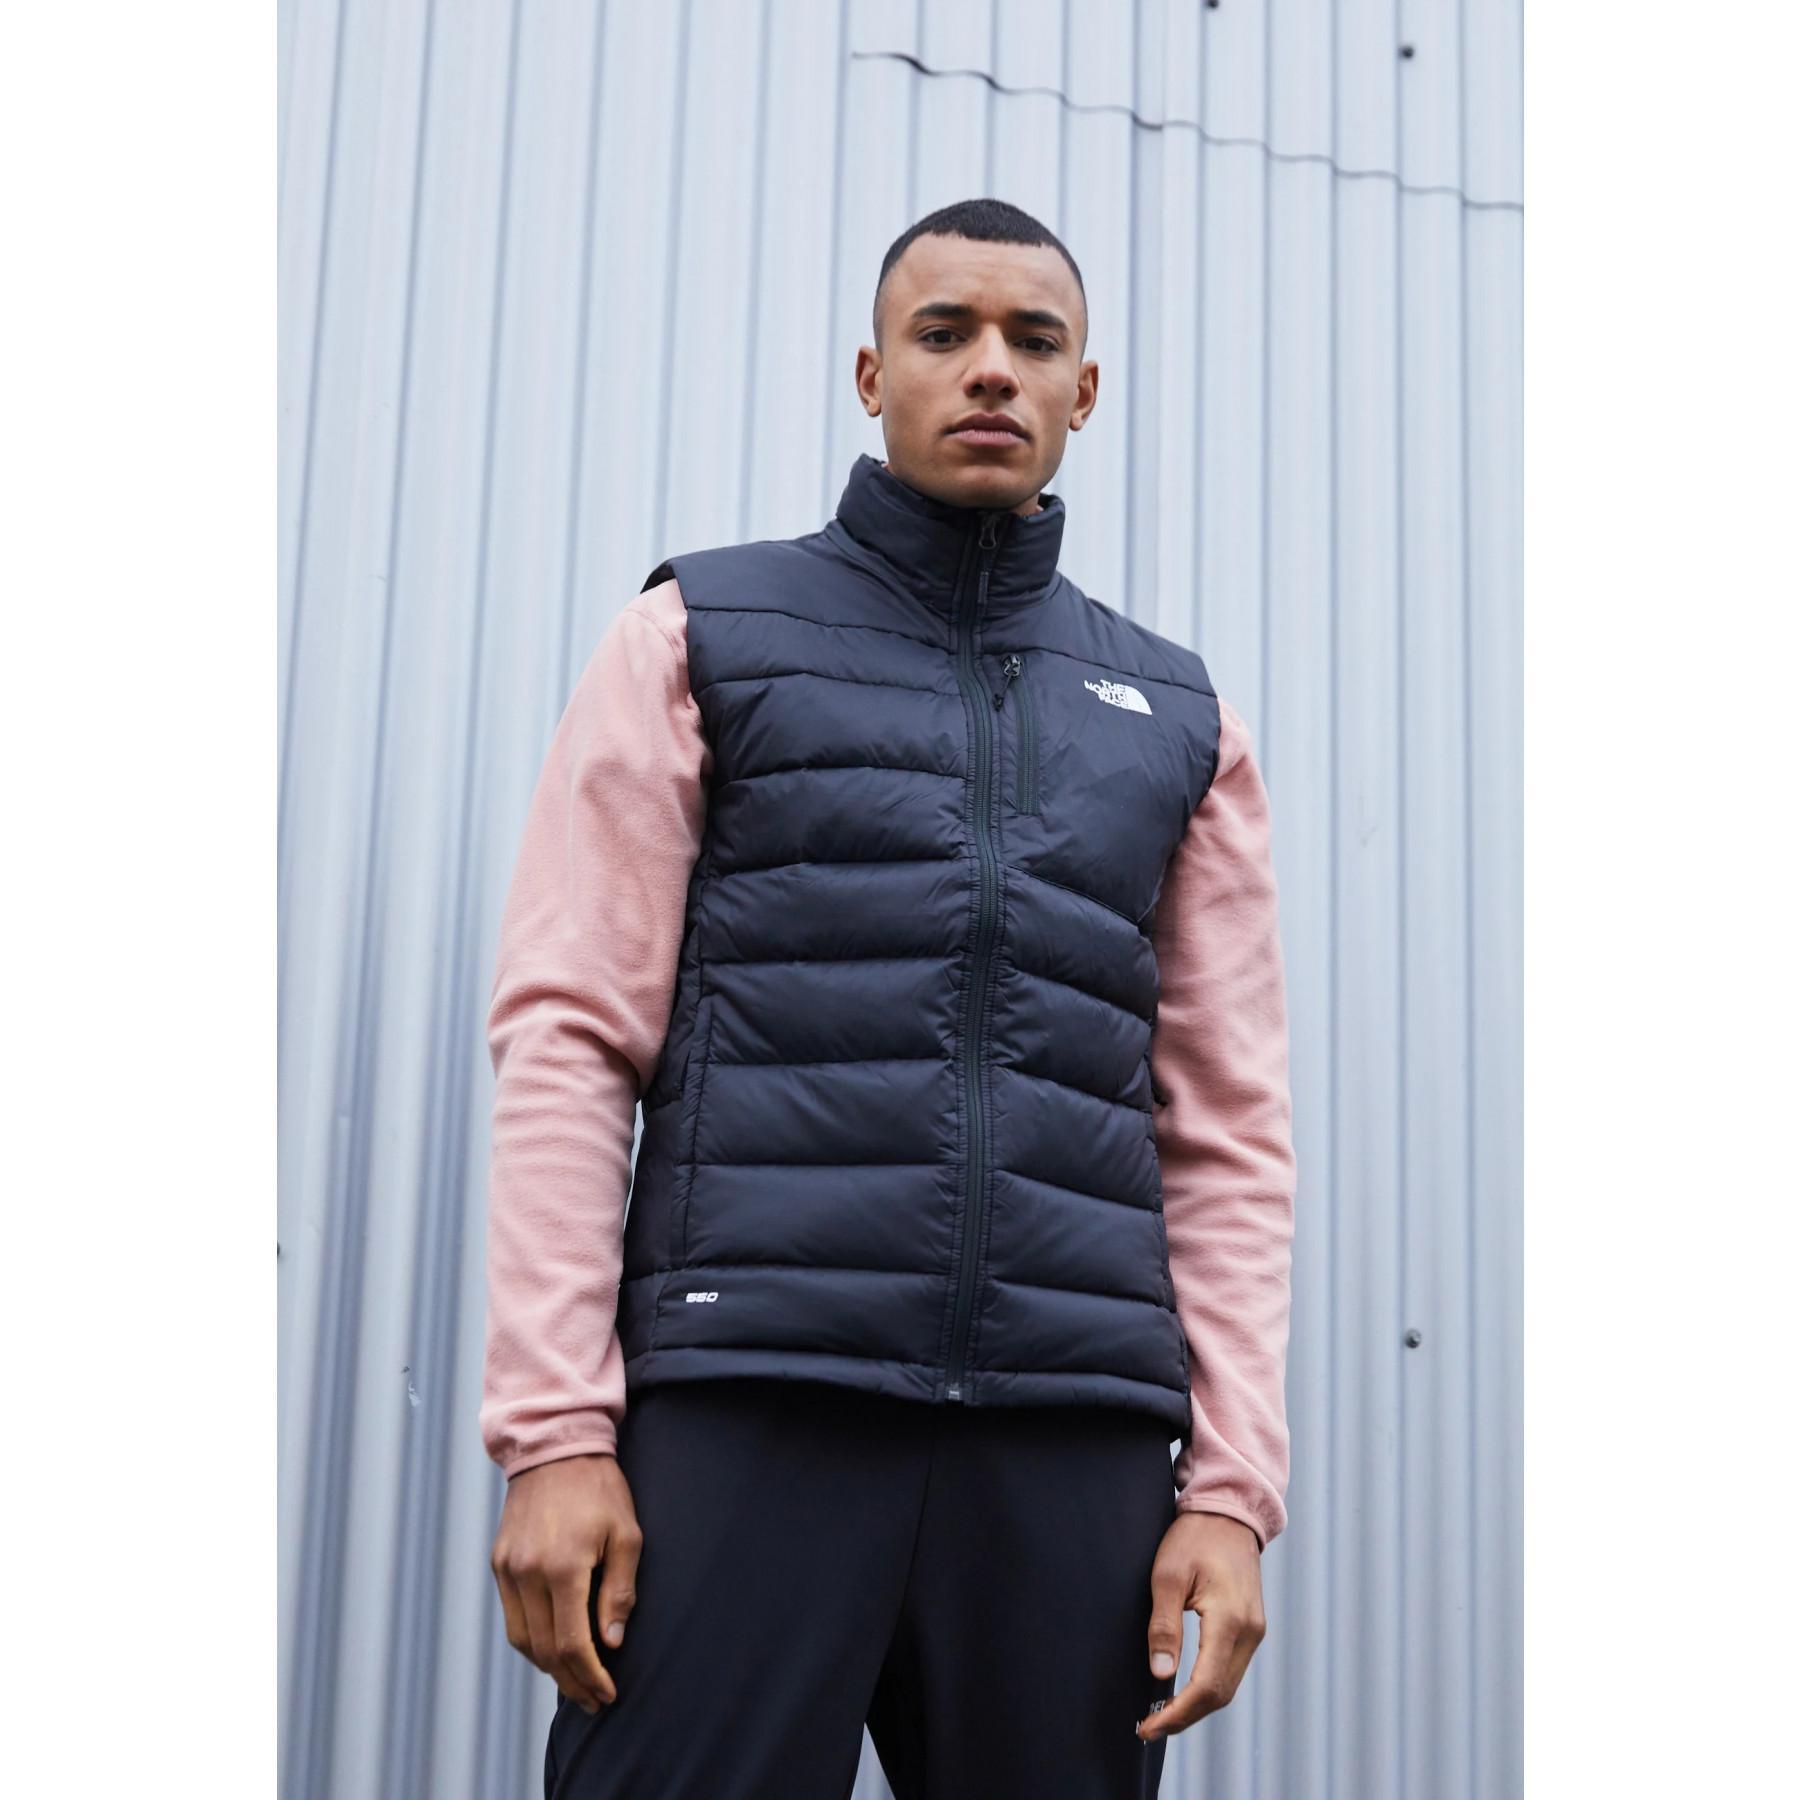 Mouwloos jasje The North Face Insulated